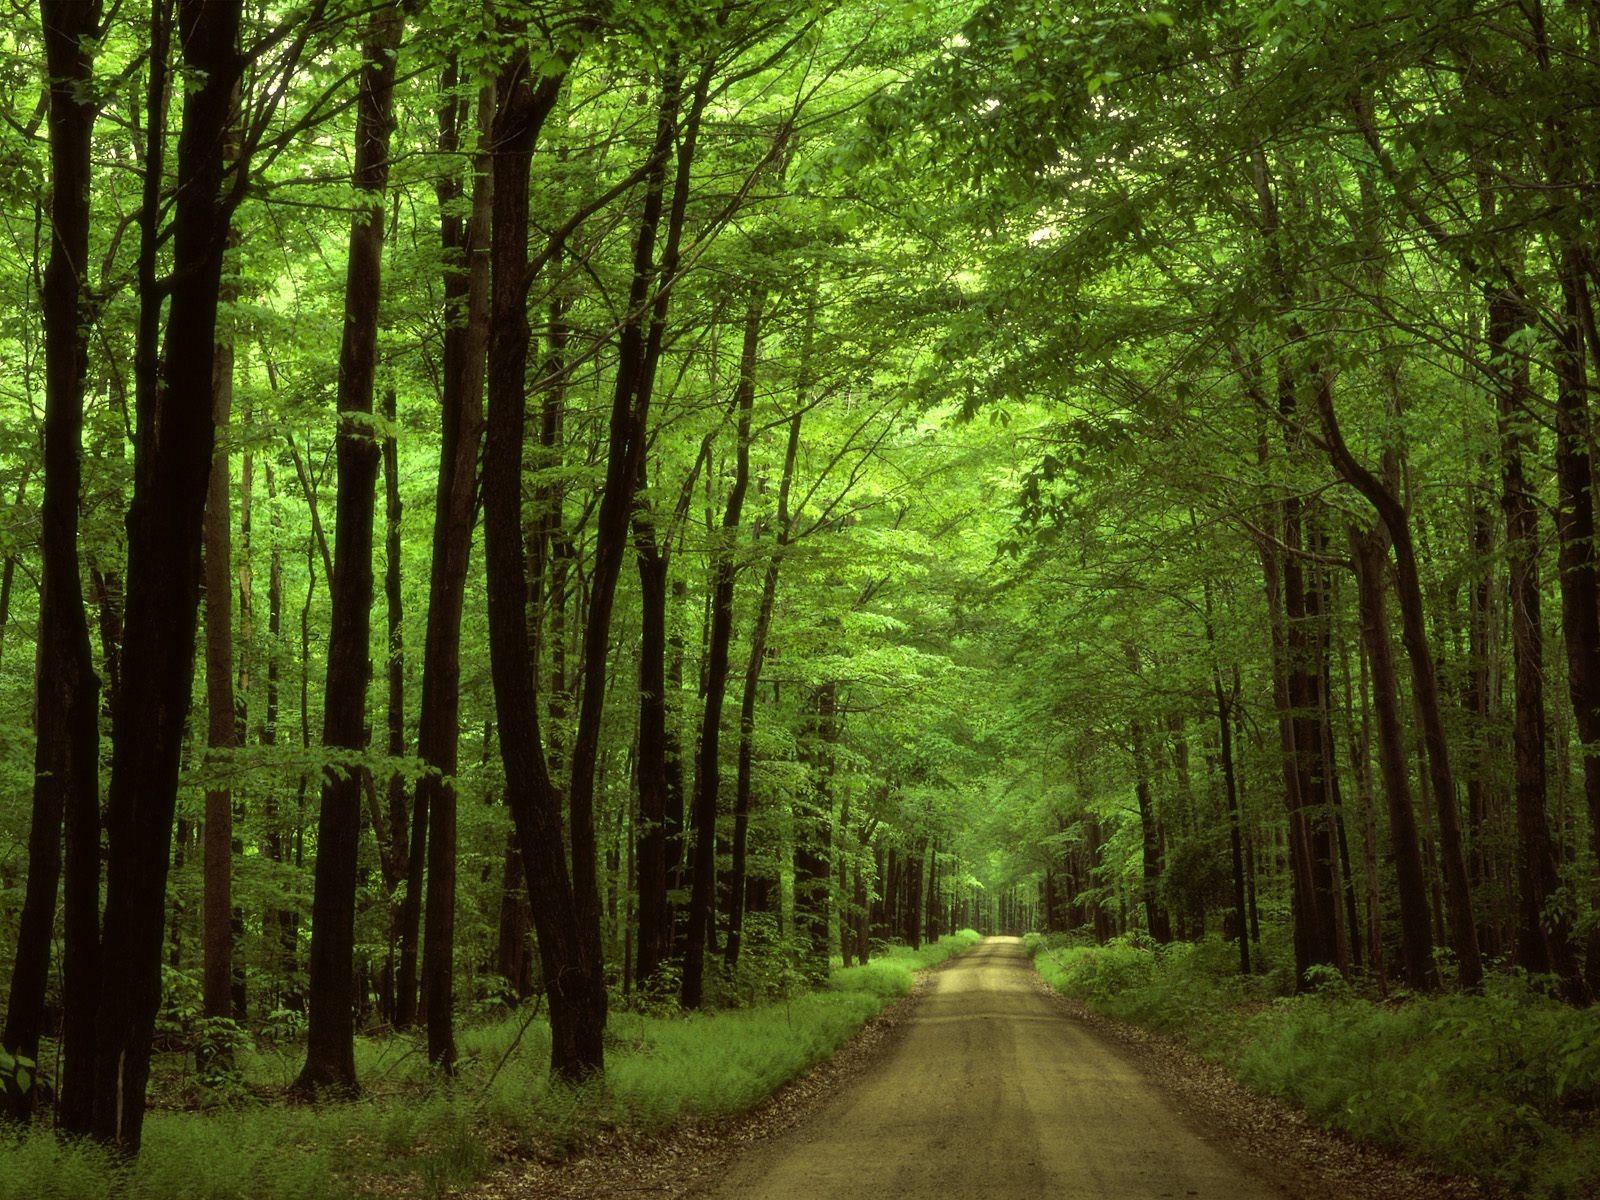 Nature forest trees roads scenery wallpaper